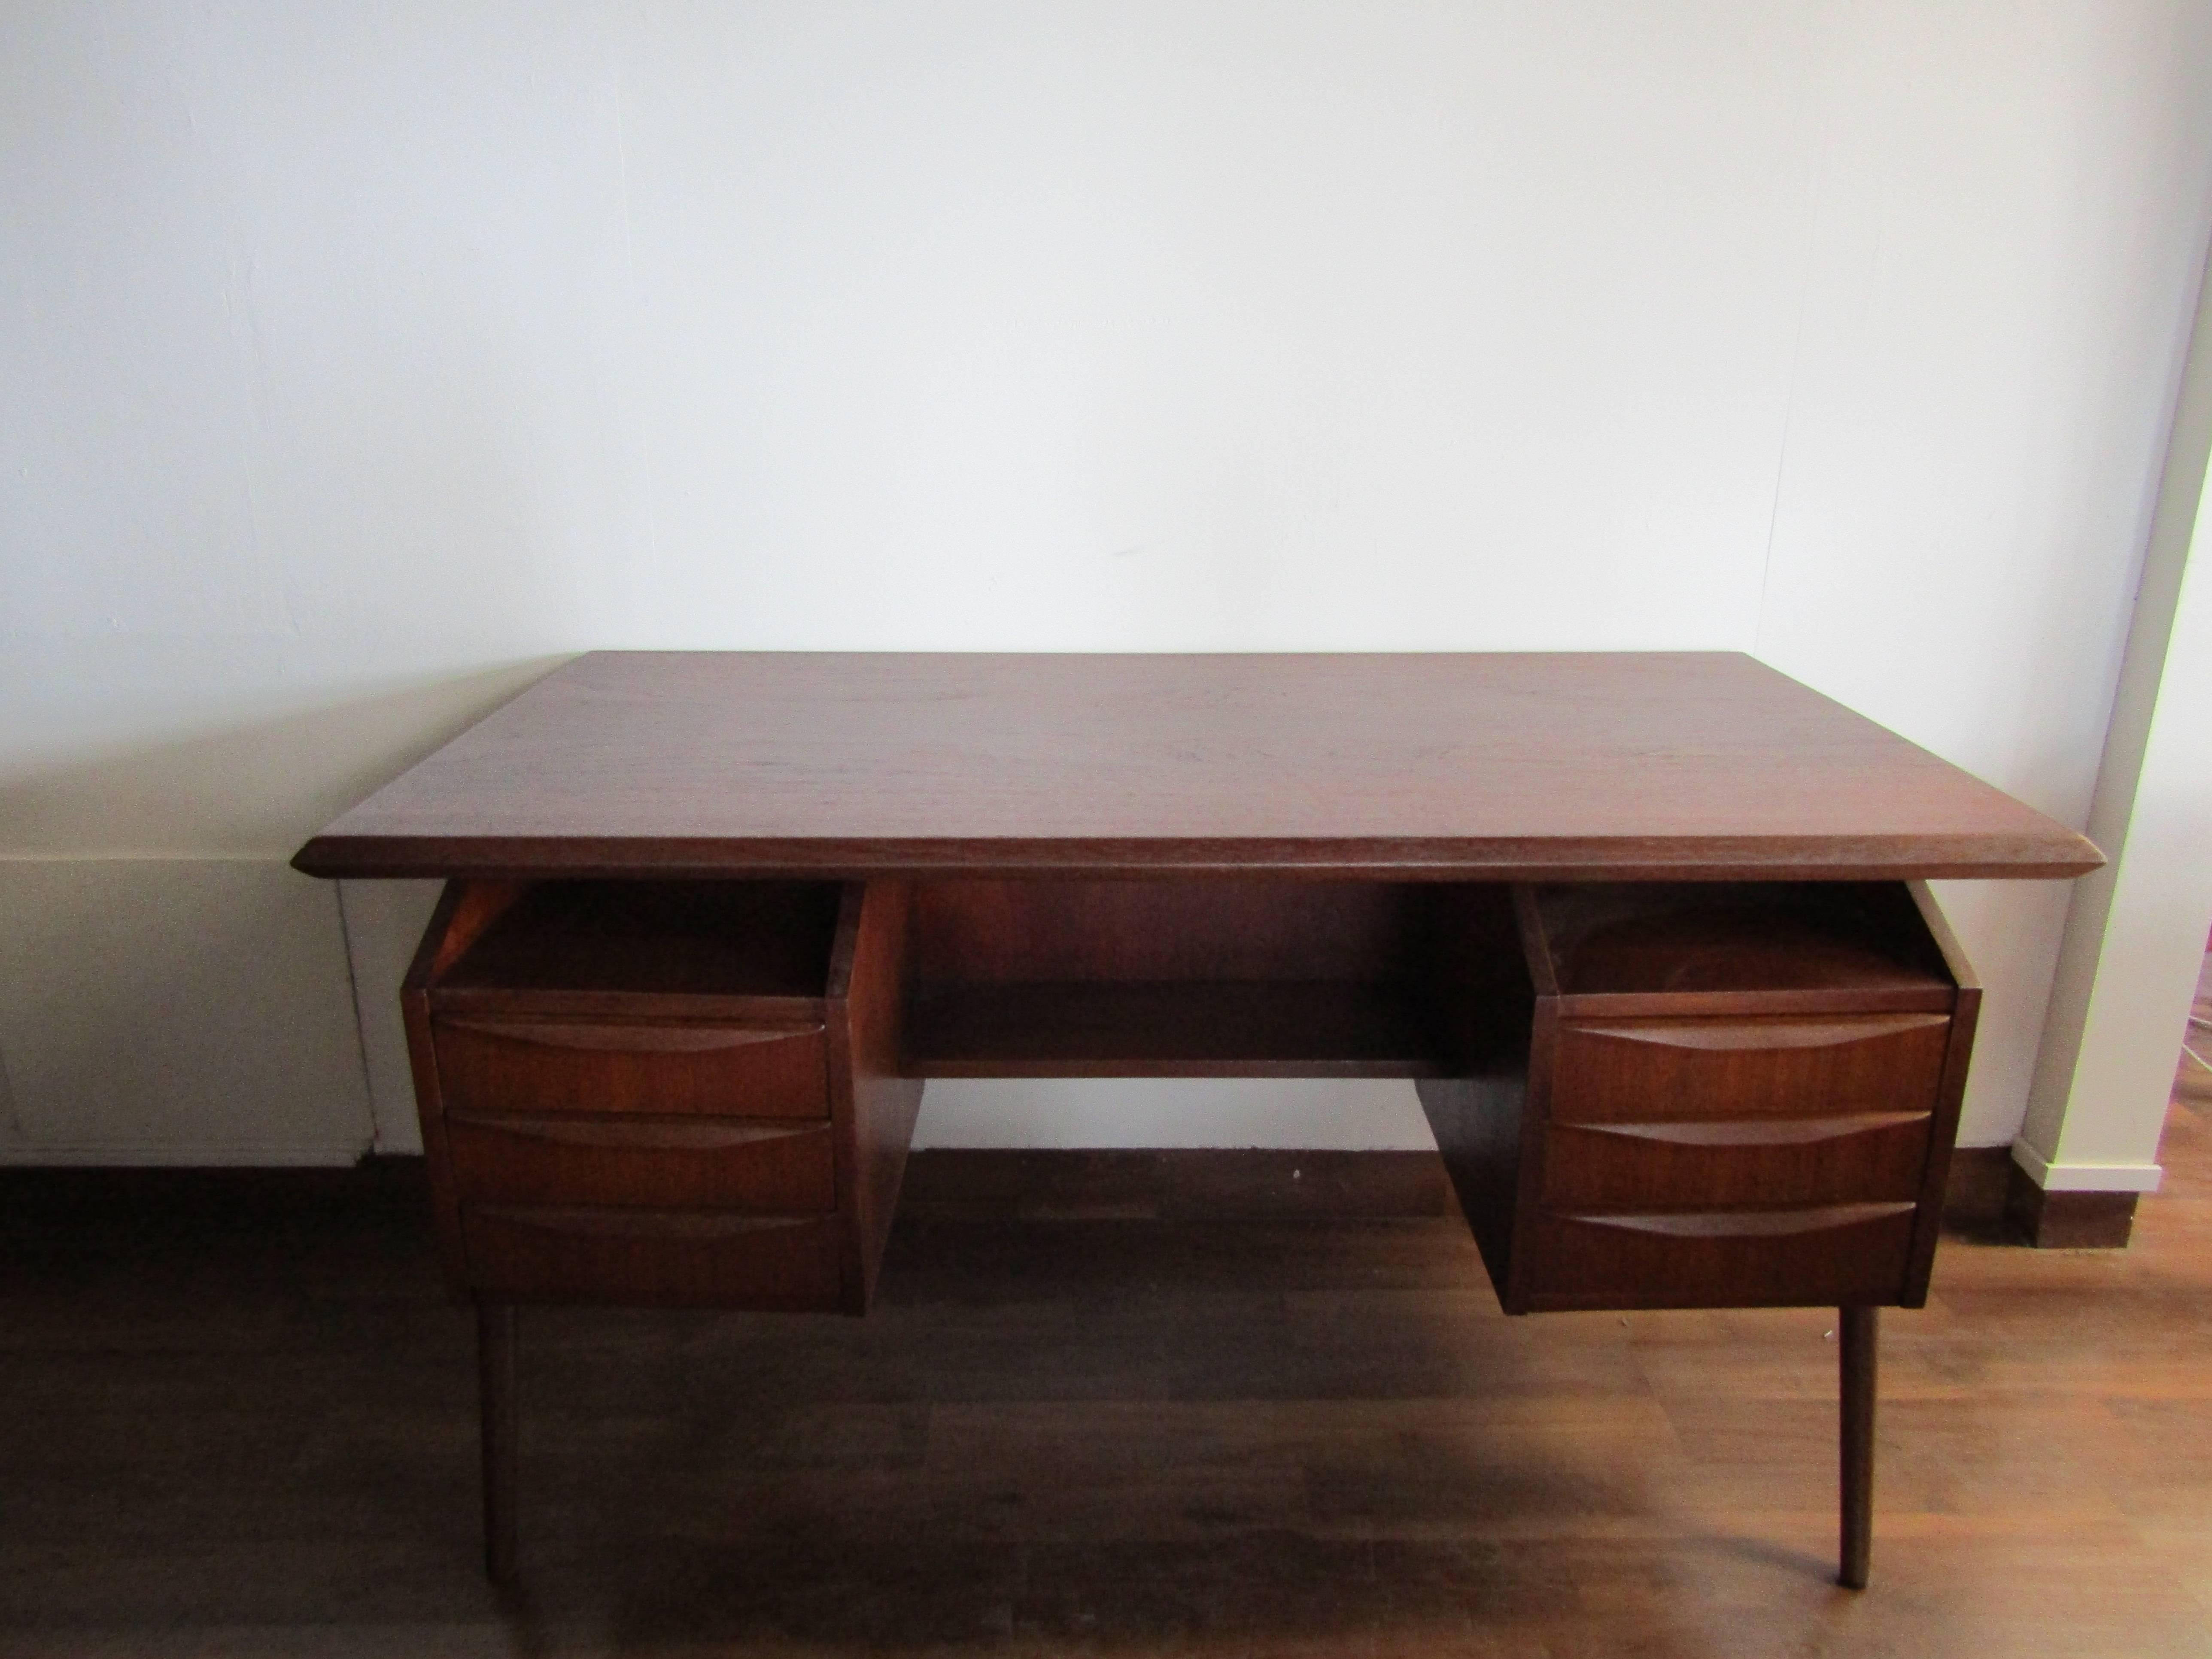 This sleek teak desk from Denmark is perfect for condos or home offices.